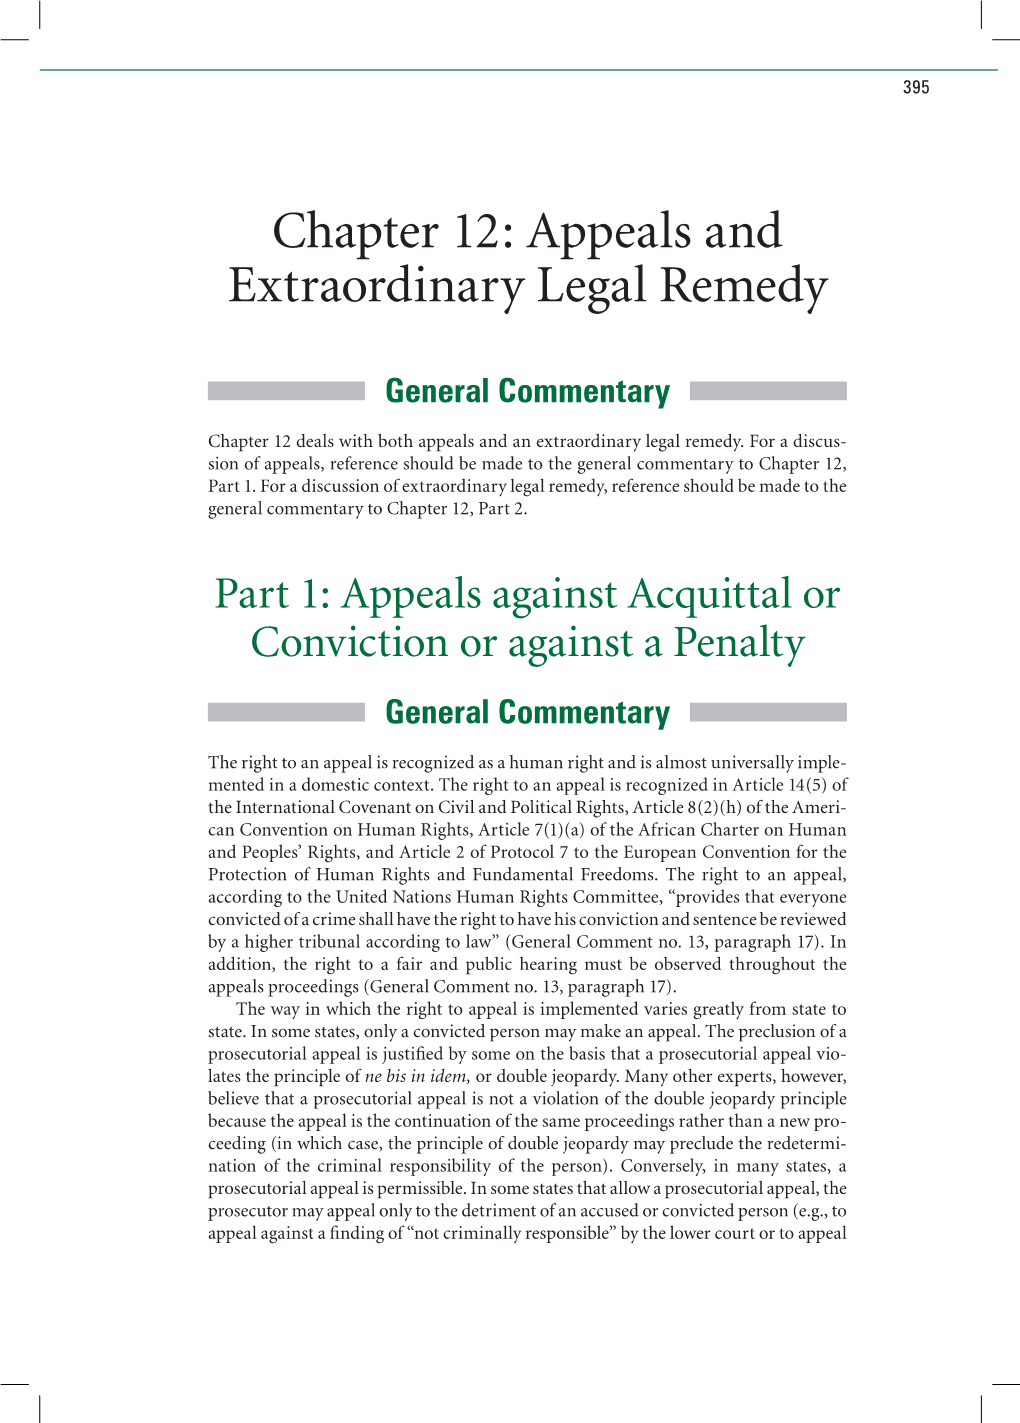 Chapter 12: Appeals and Extraordinary Legal Remedy